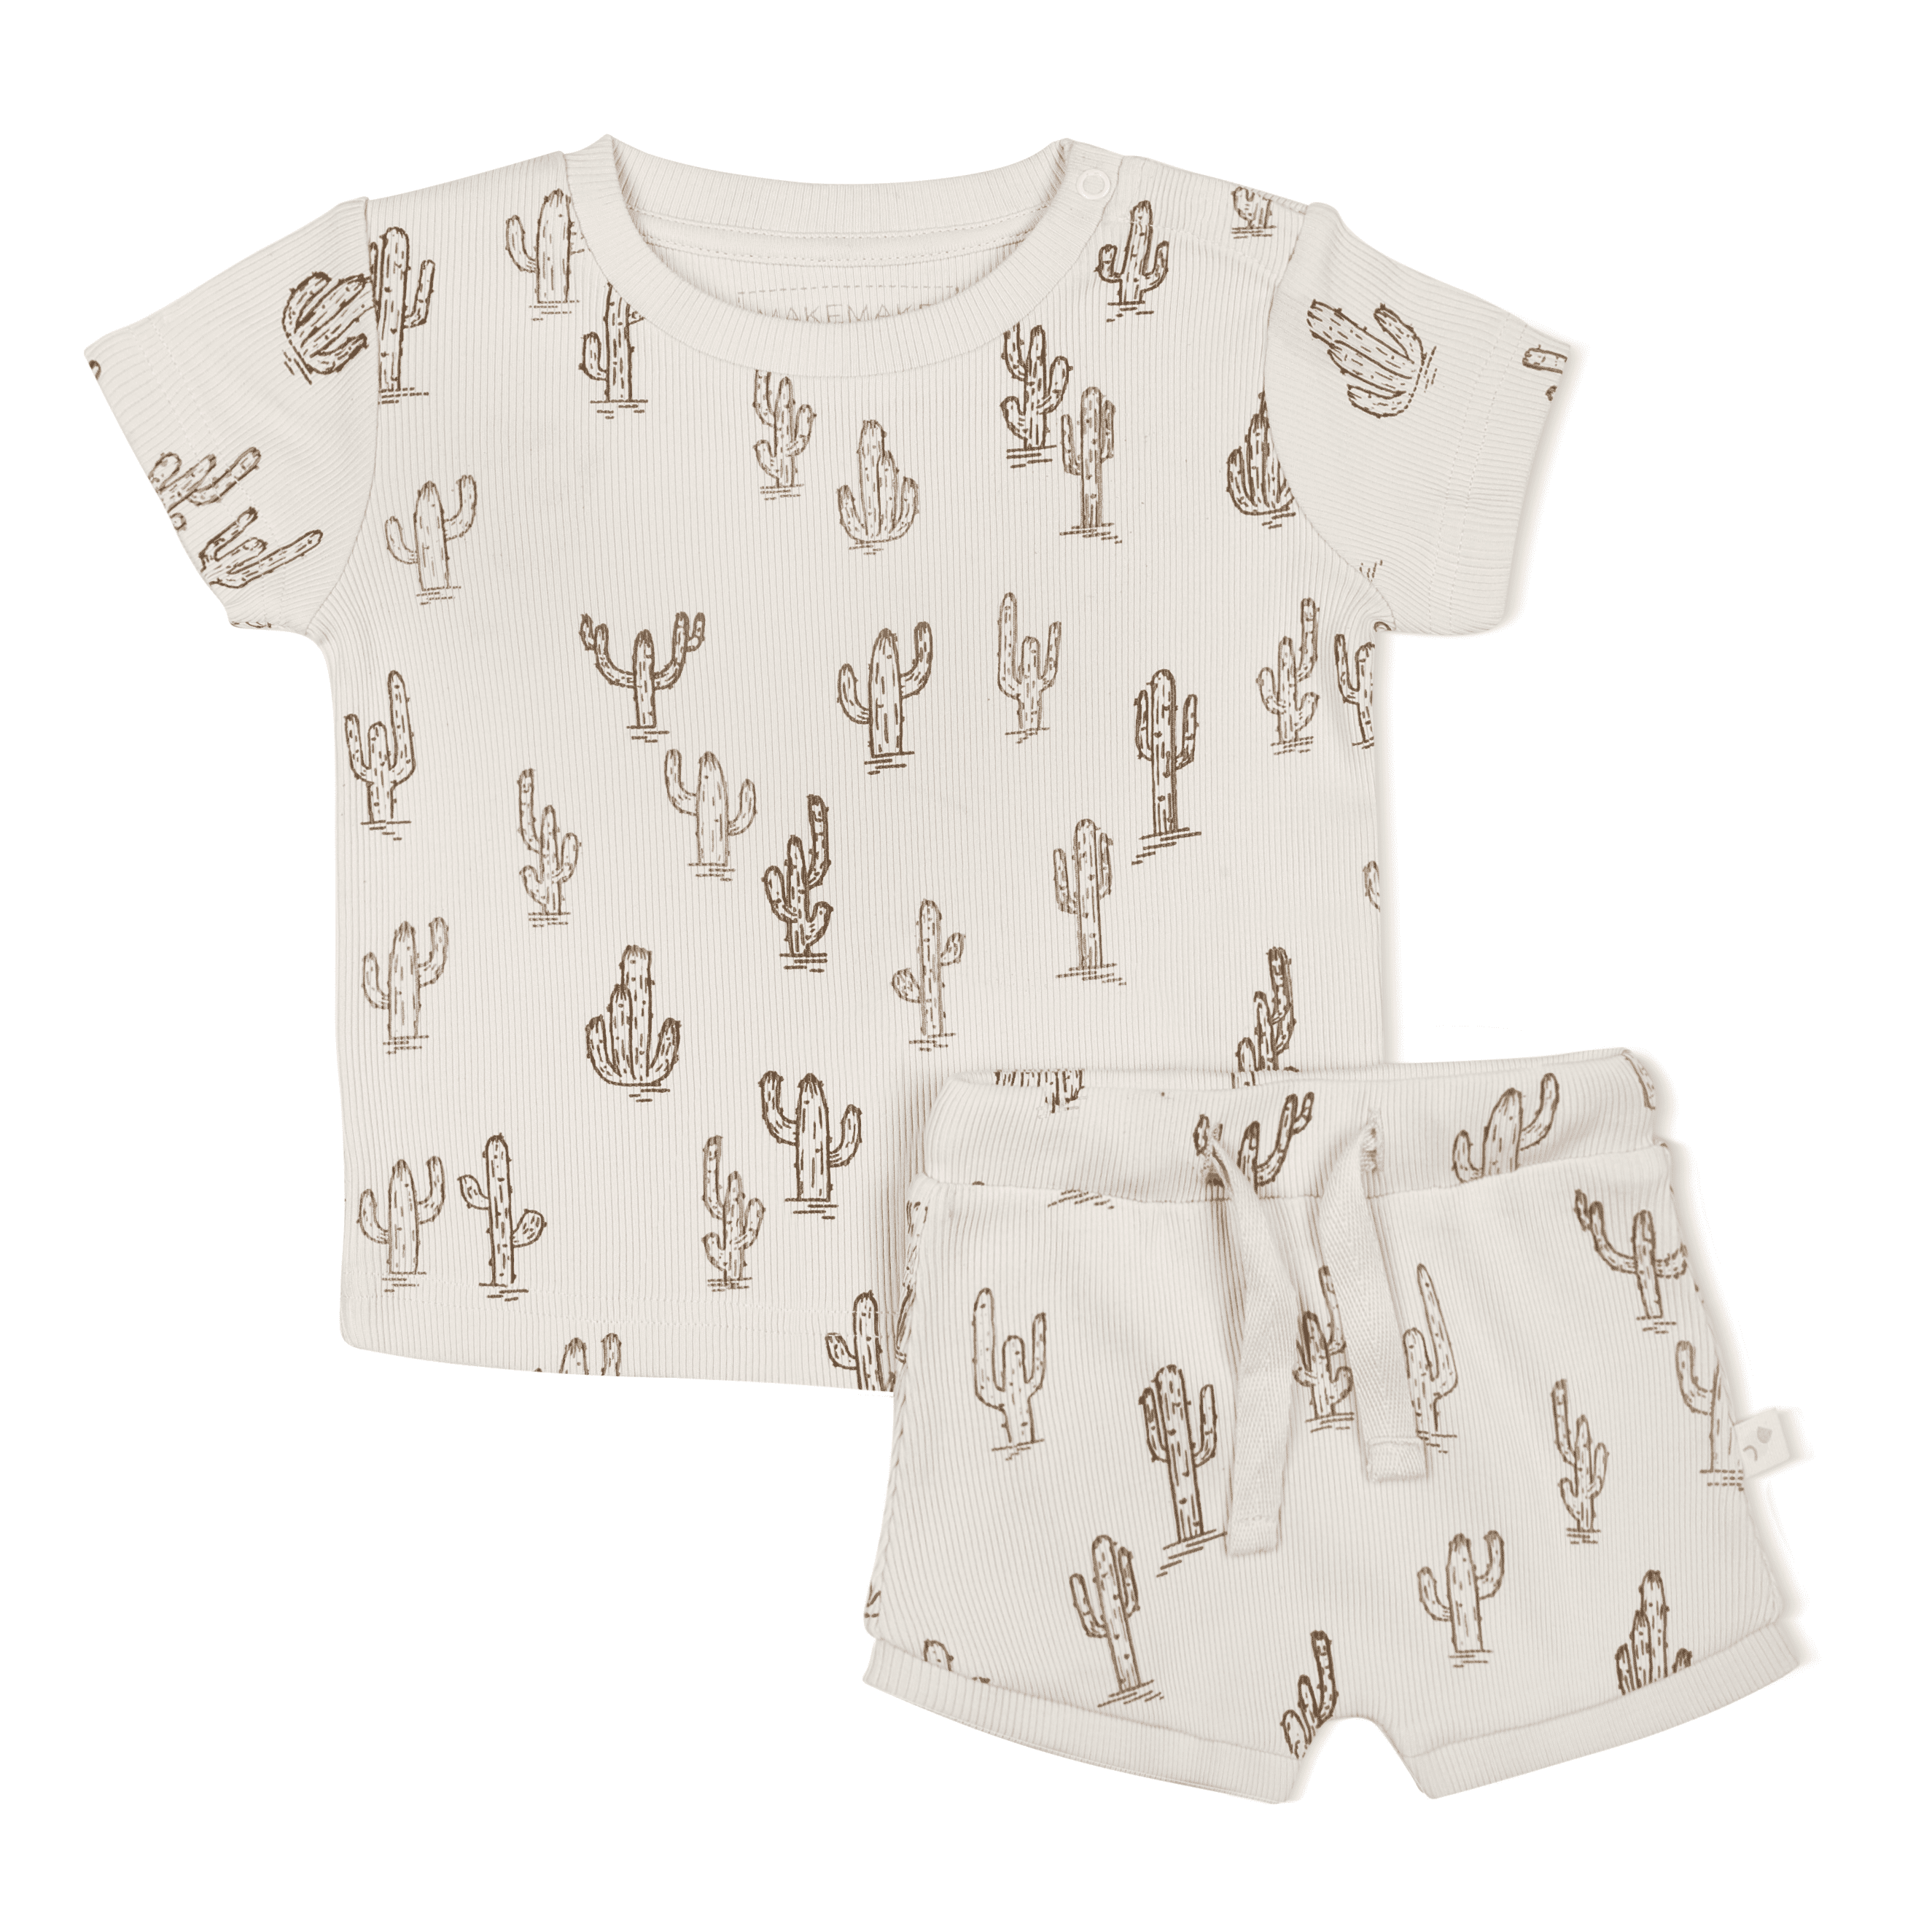 A white baby outfit featuring a Makemake Organics Organic Tee and Shorties Set - Cactus, displayed on a plain background.